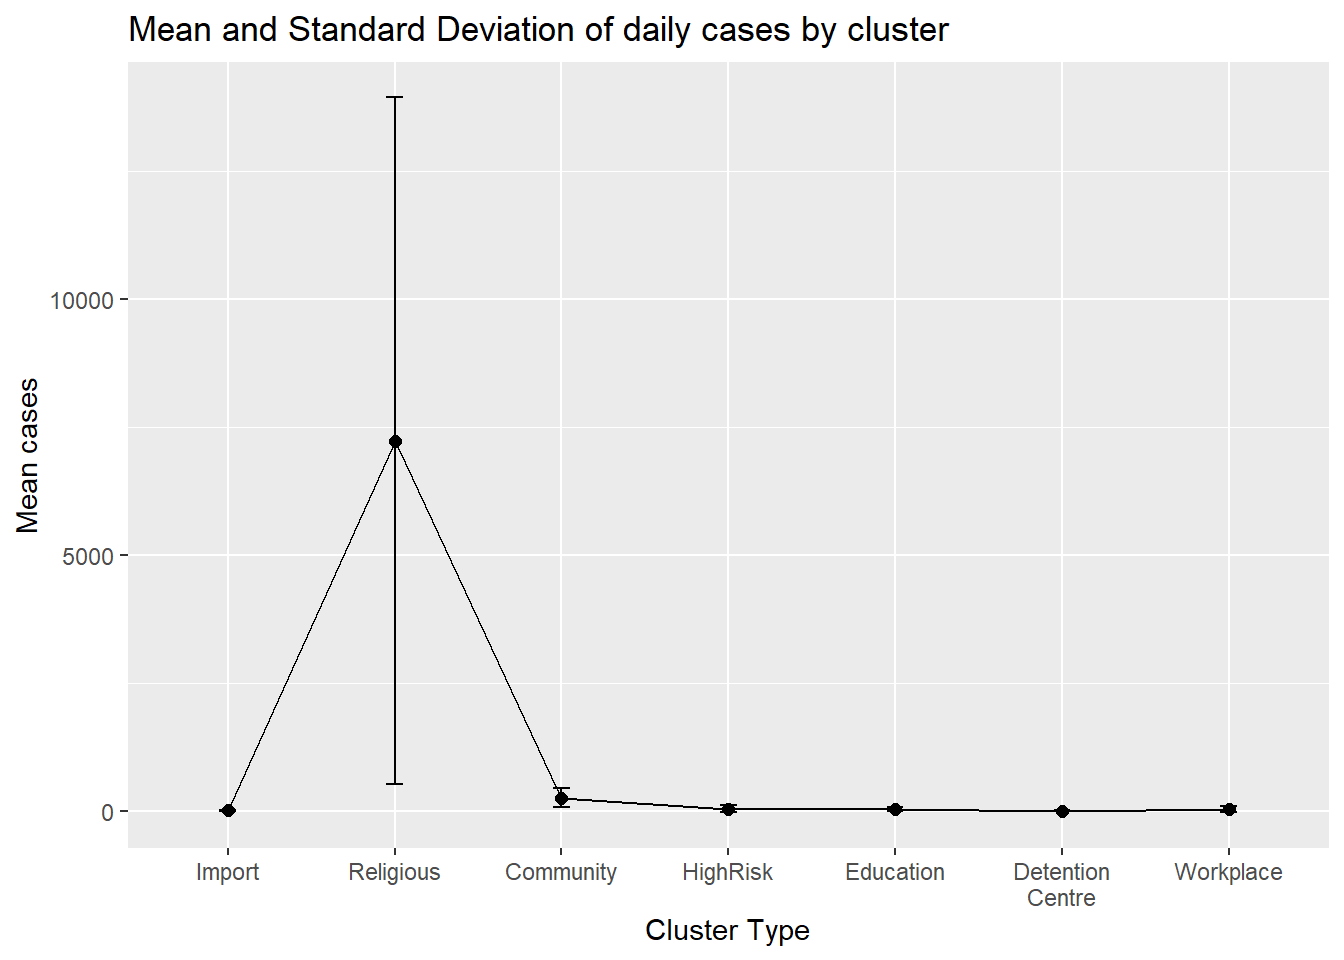 Mean and standard deviations for each cluster